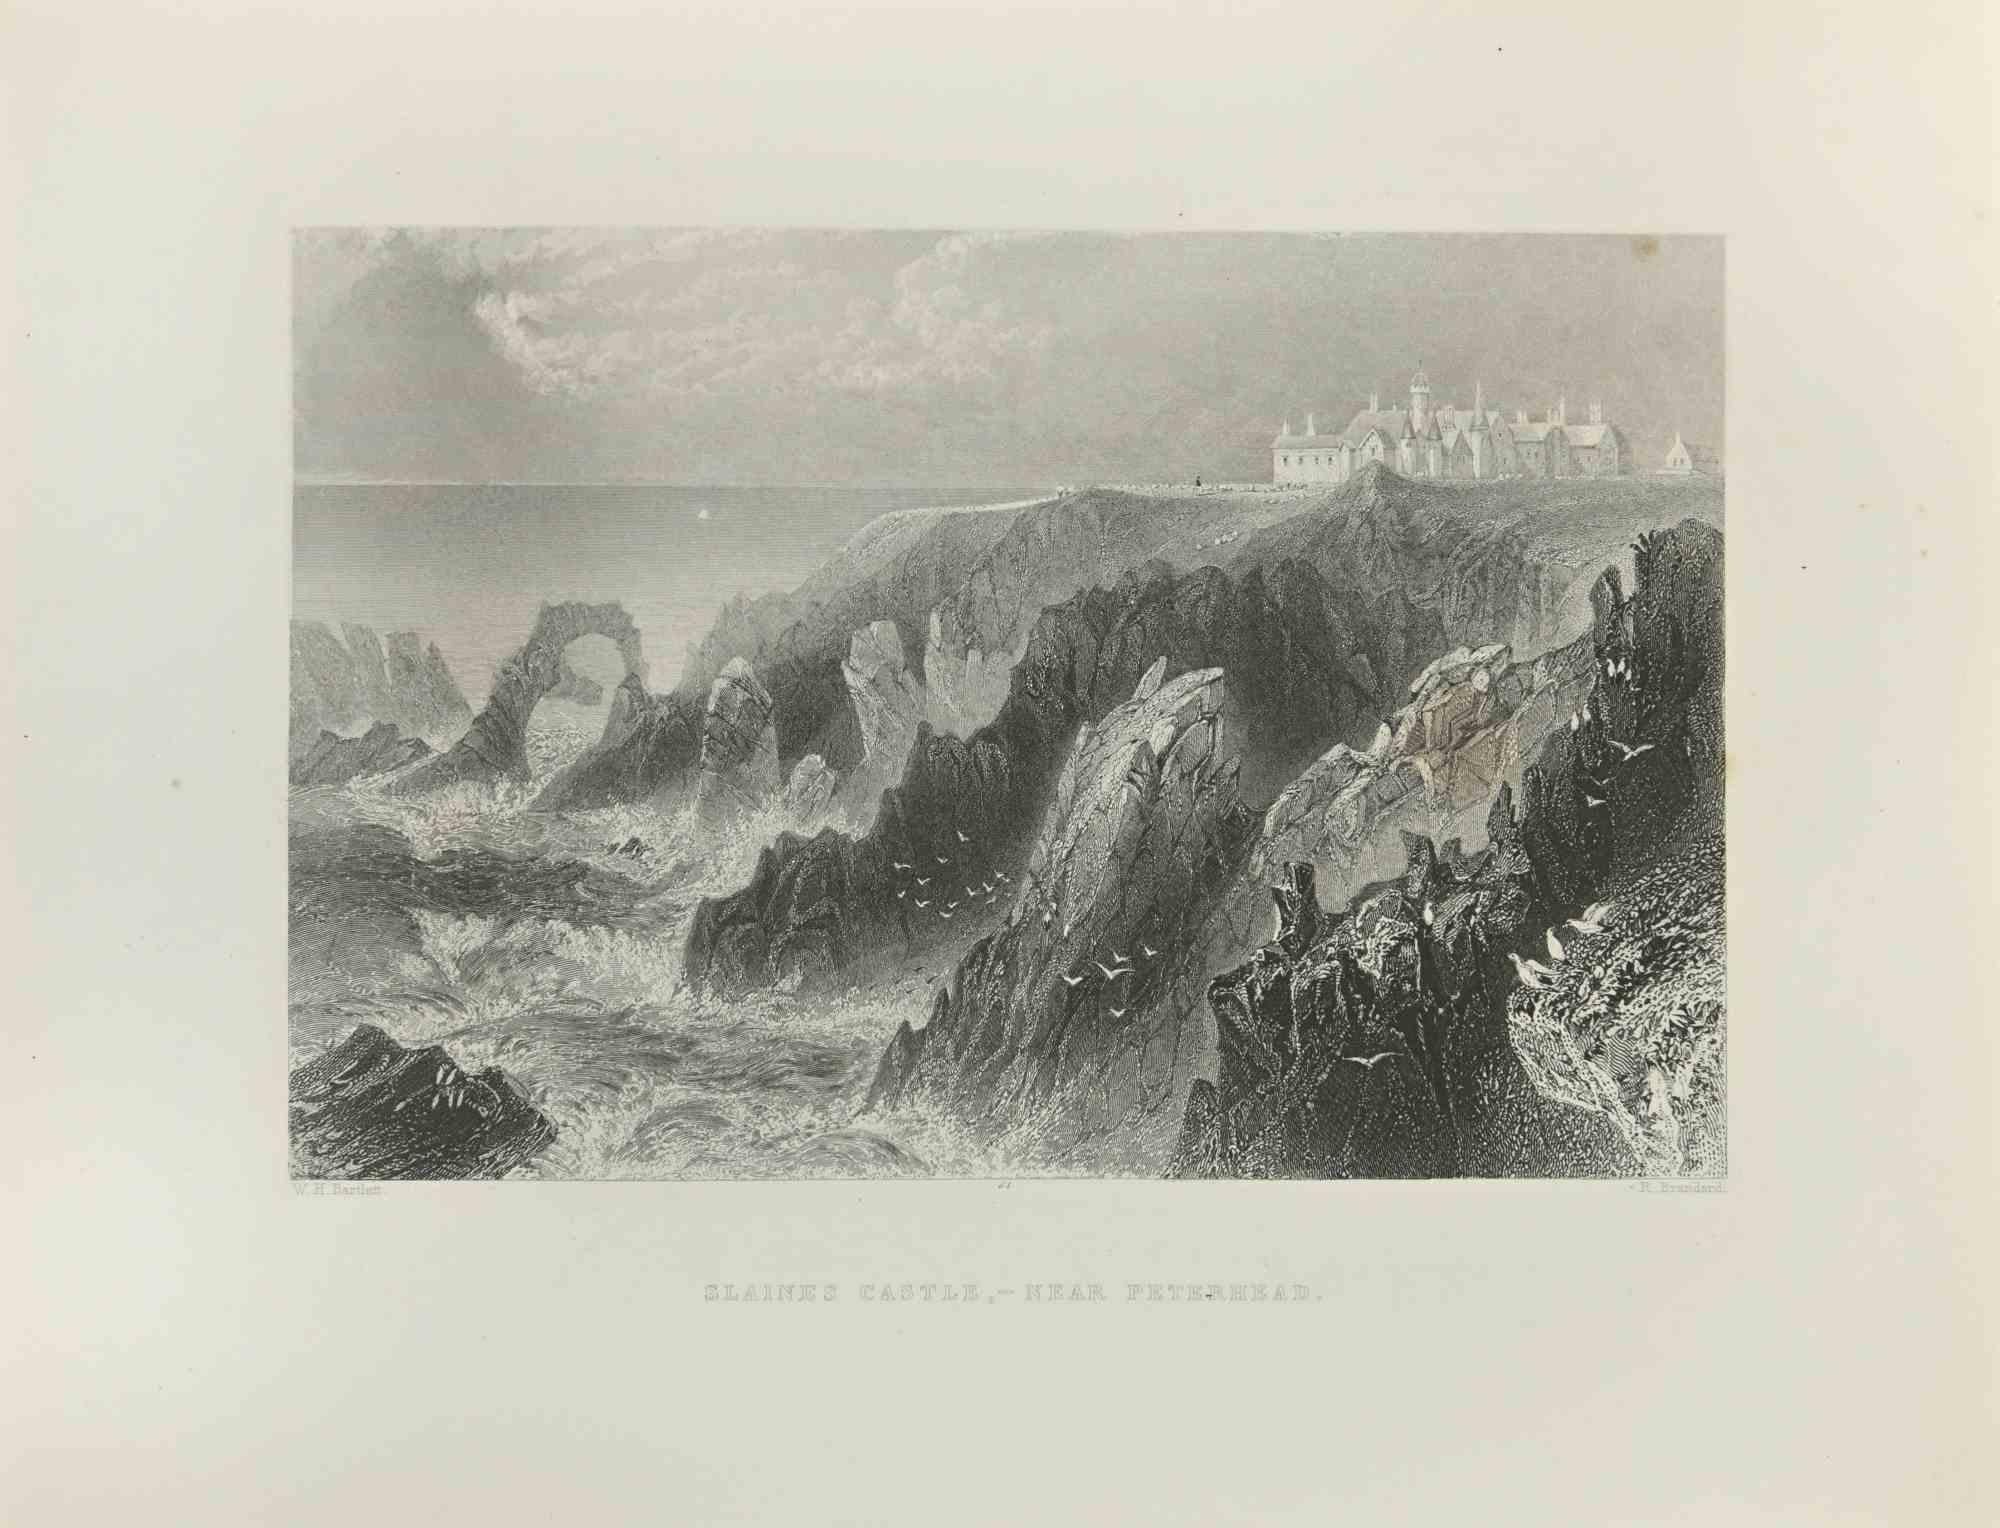 Slaines Castle  - Near Peterhead is an engraving realized in the 1845 by R.Brandard.

signed on plate.

The artwork is realized in a well-balanced composition.